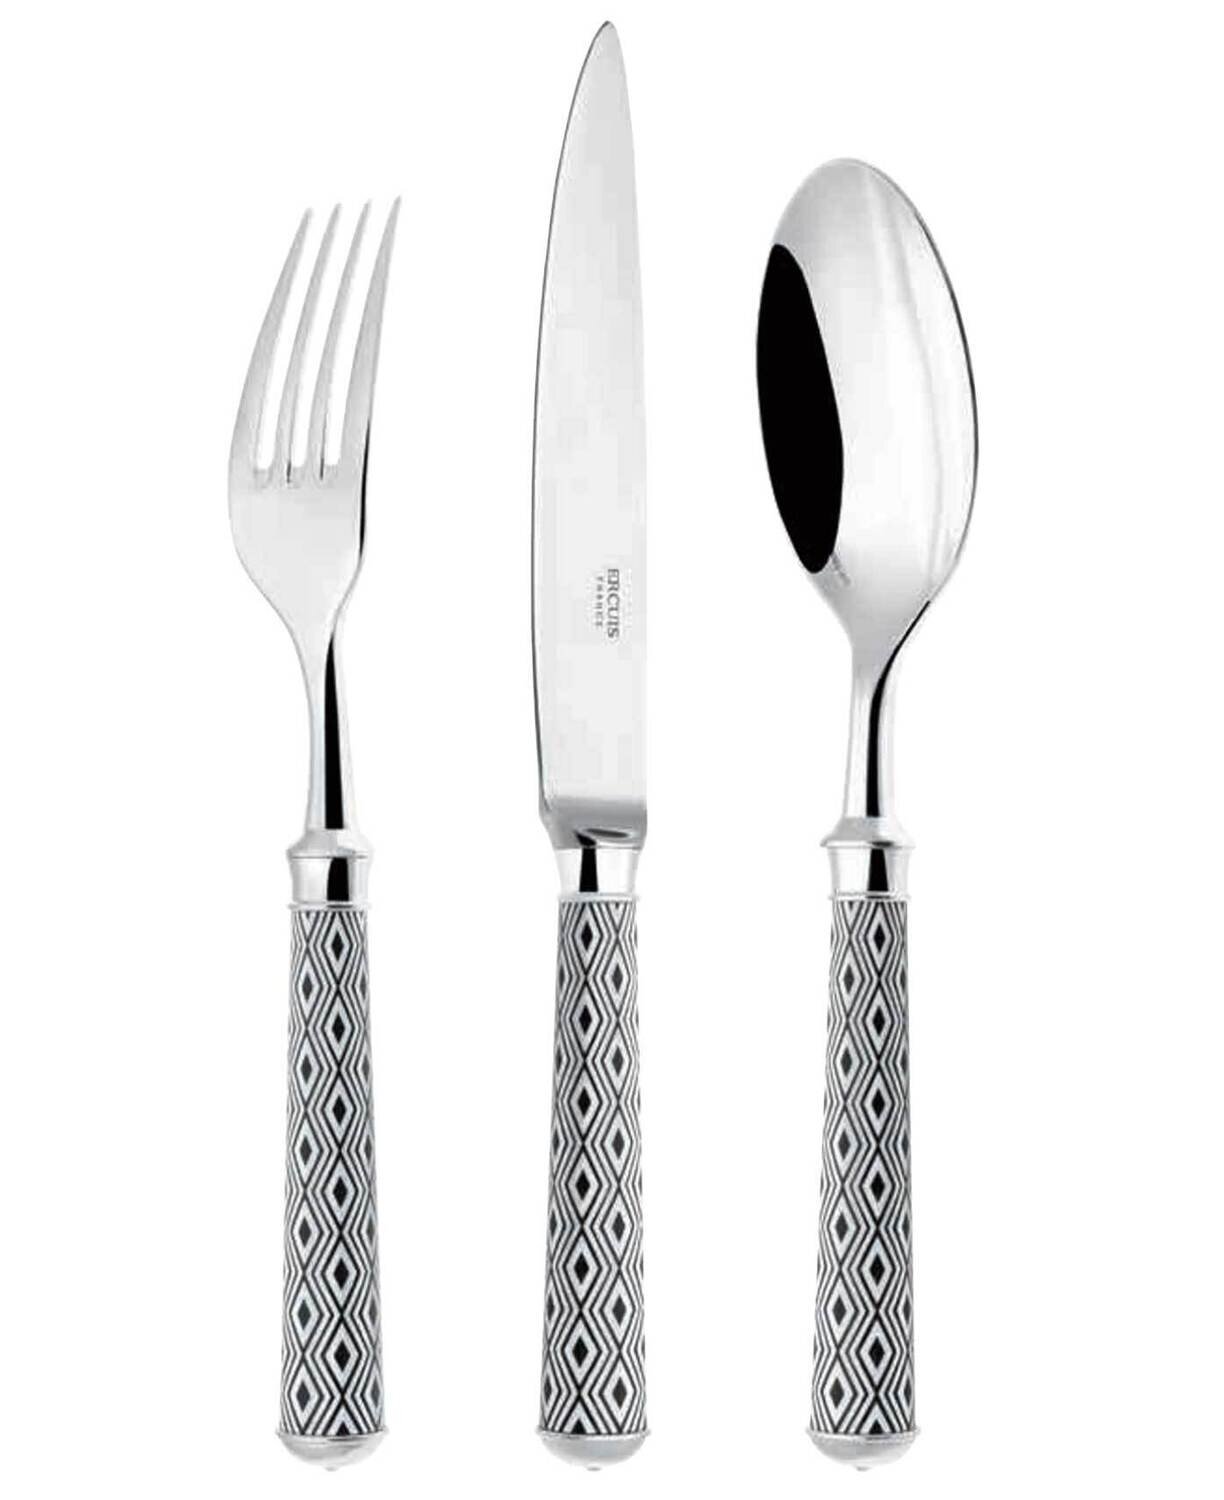 Ercuis Arlequin White Dinner Fork 8.375 Inch Silver Plated F600548-02